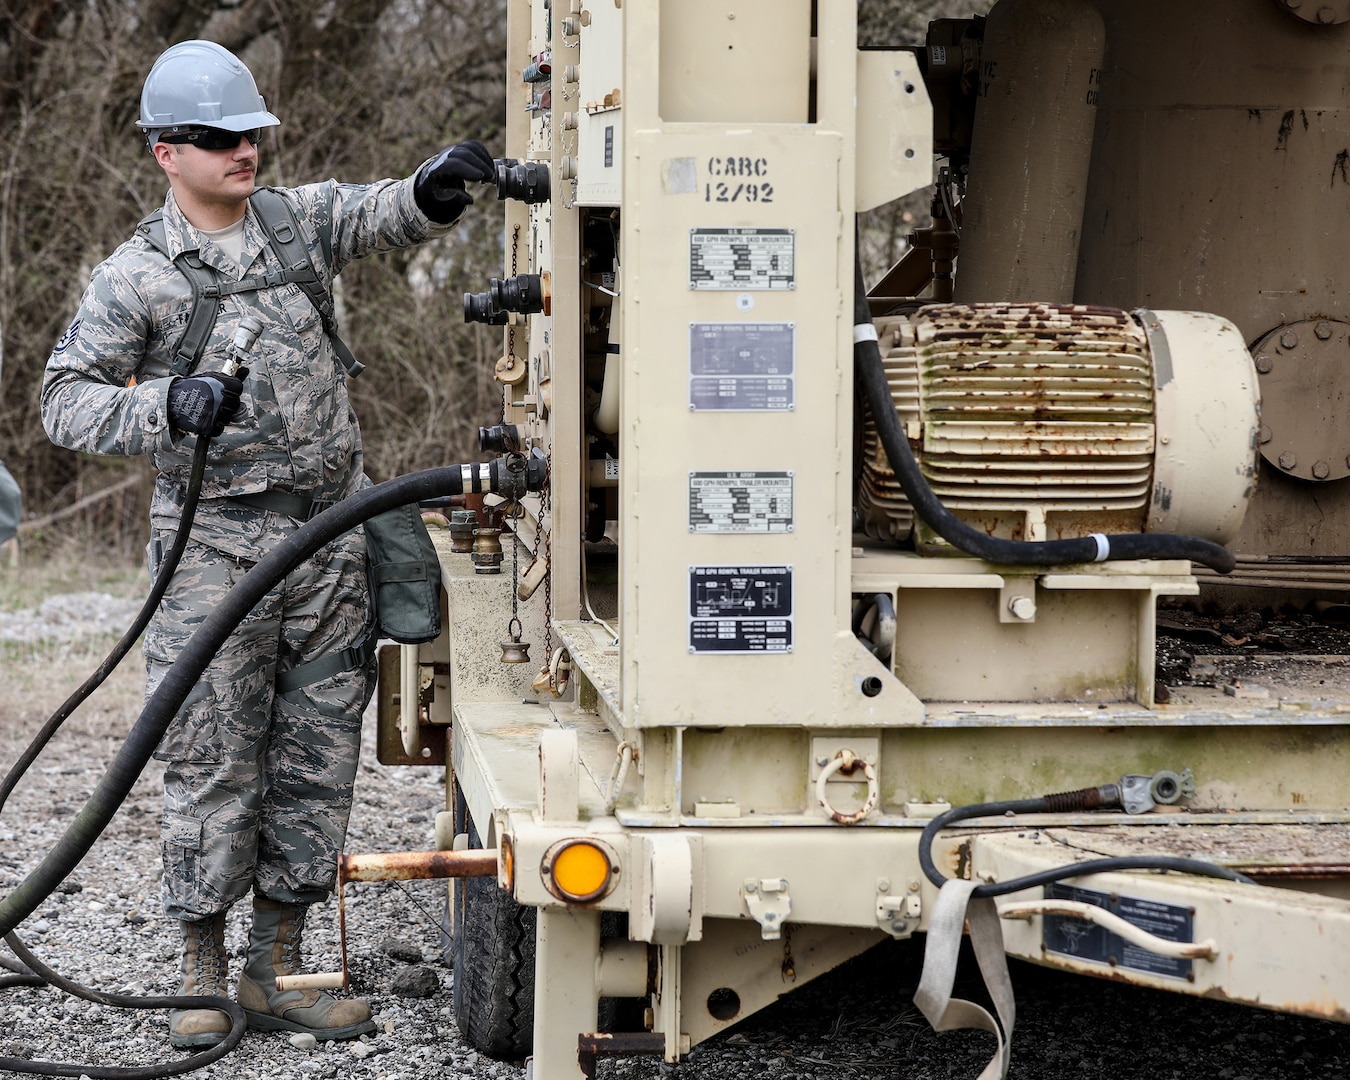 Staff Sgt. Jarrad Faulkner, 445th Civil Engineering Squadron, salvages parts of a reverse osmosis water purification unit during the annual Agile Combat Support exercise at the Warfighter Training Center April 7, 2019.